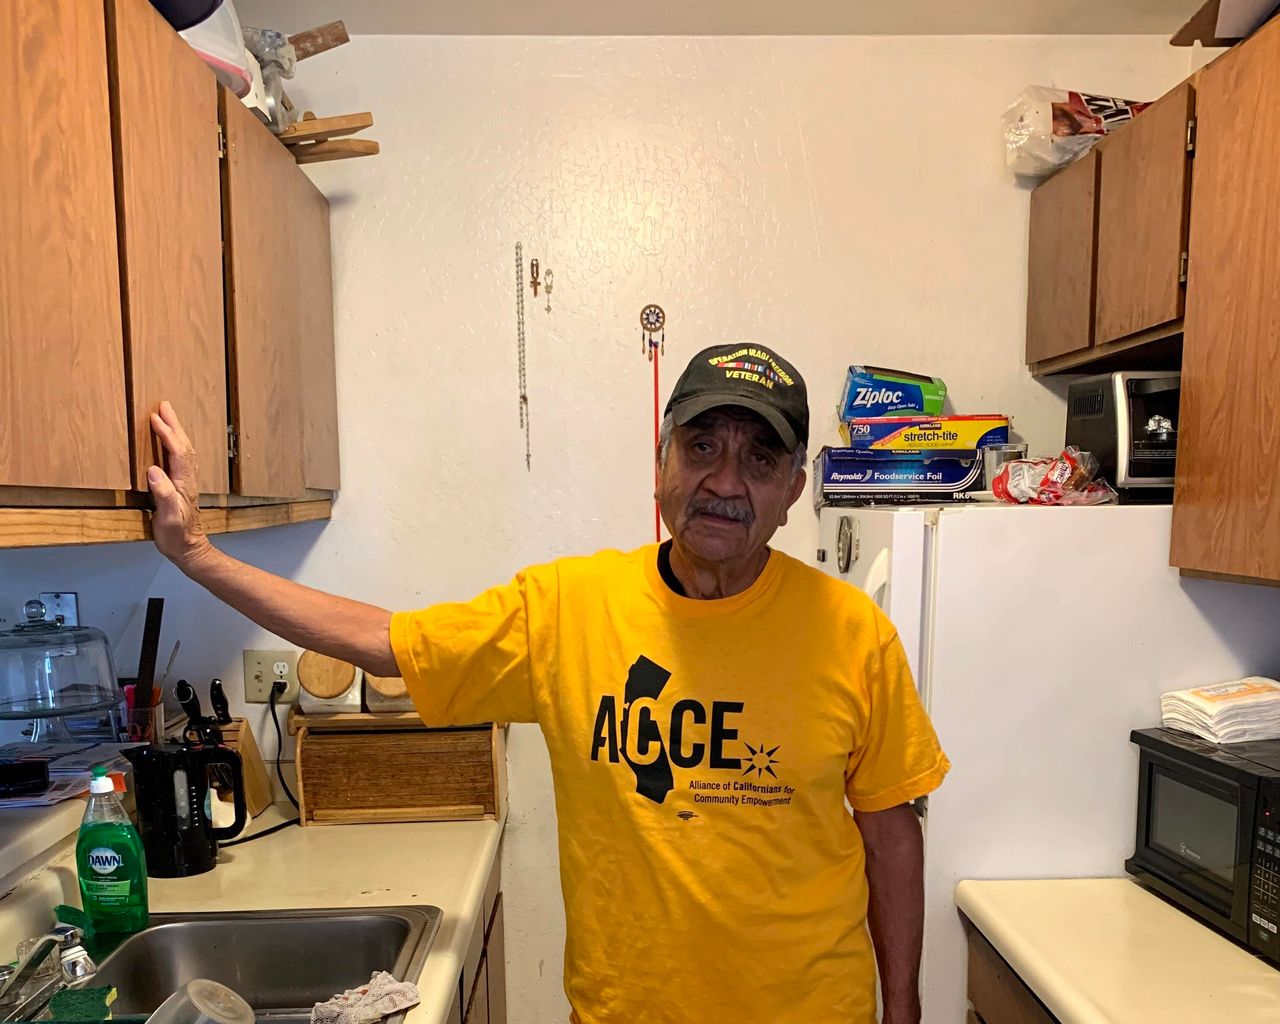 Francisco Perez stands in the kitchen of his Oakland apartment. He is on rent strike to protest the poor conditions of his home and the steeply increasing rents.